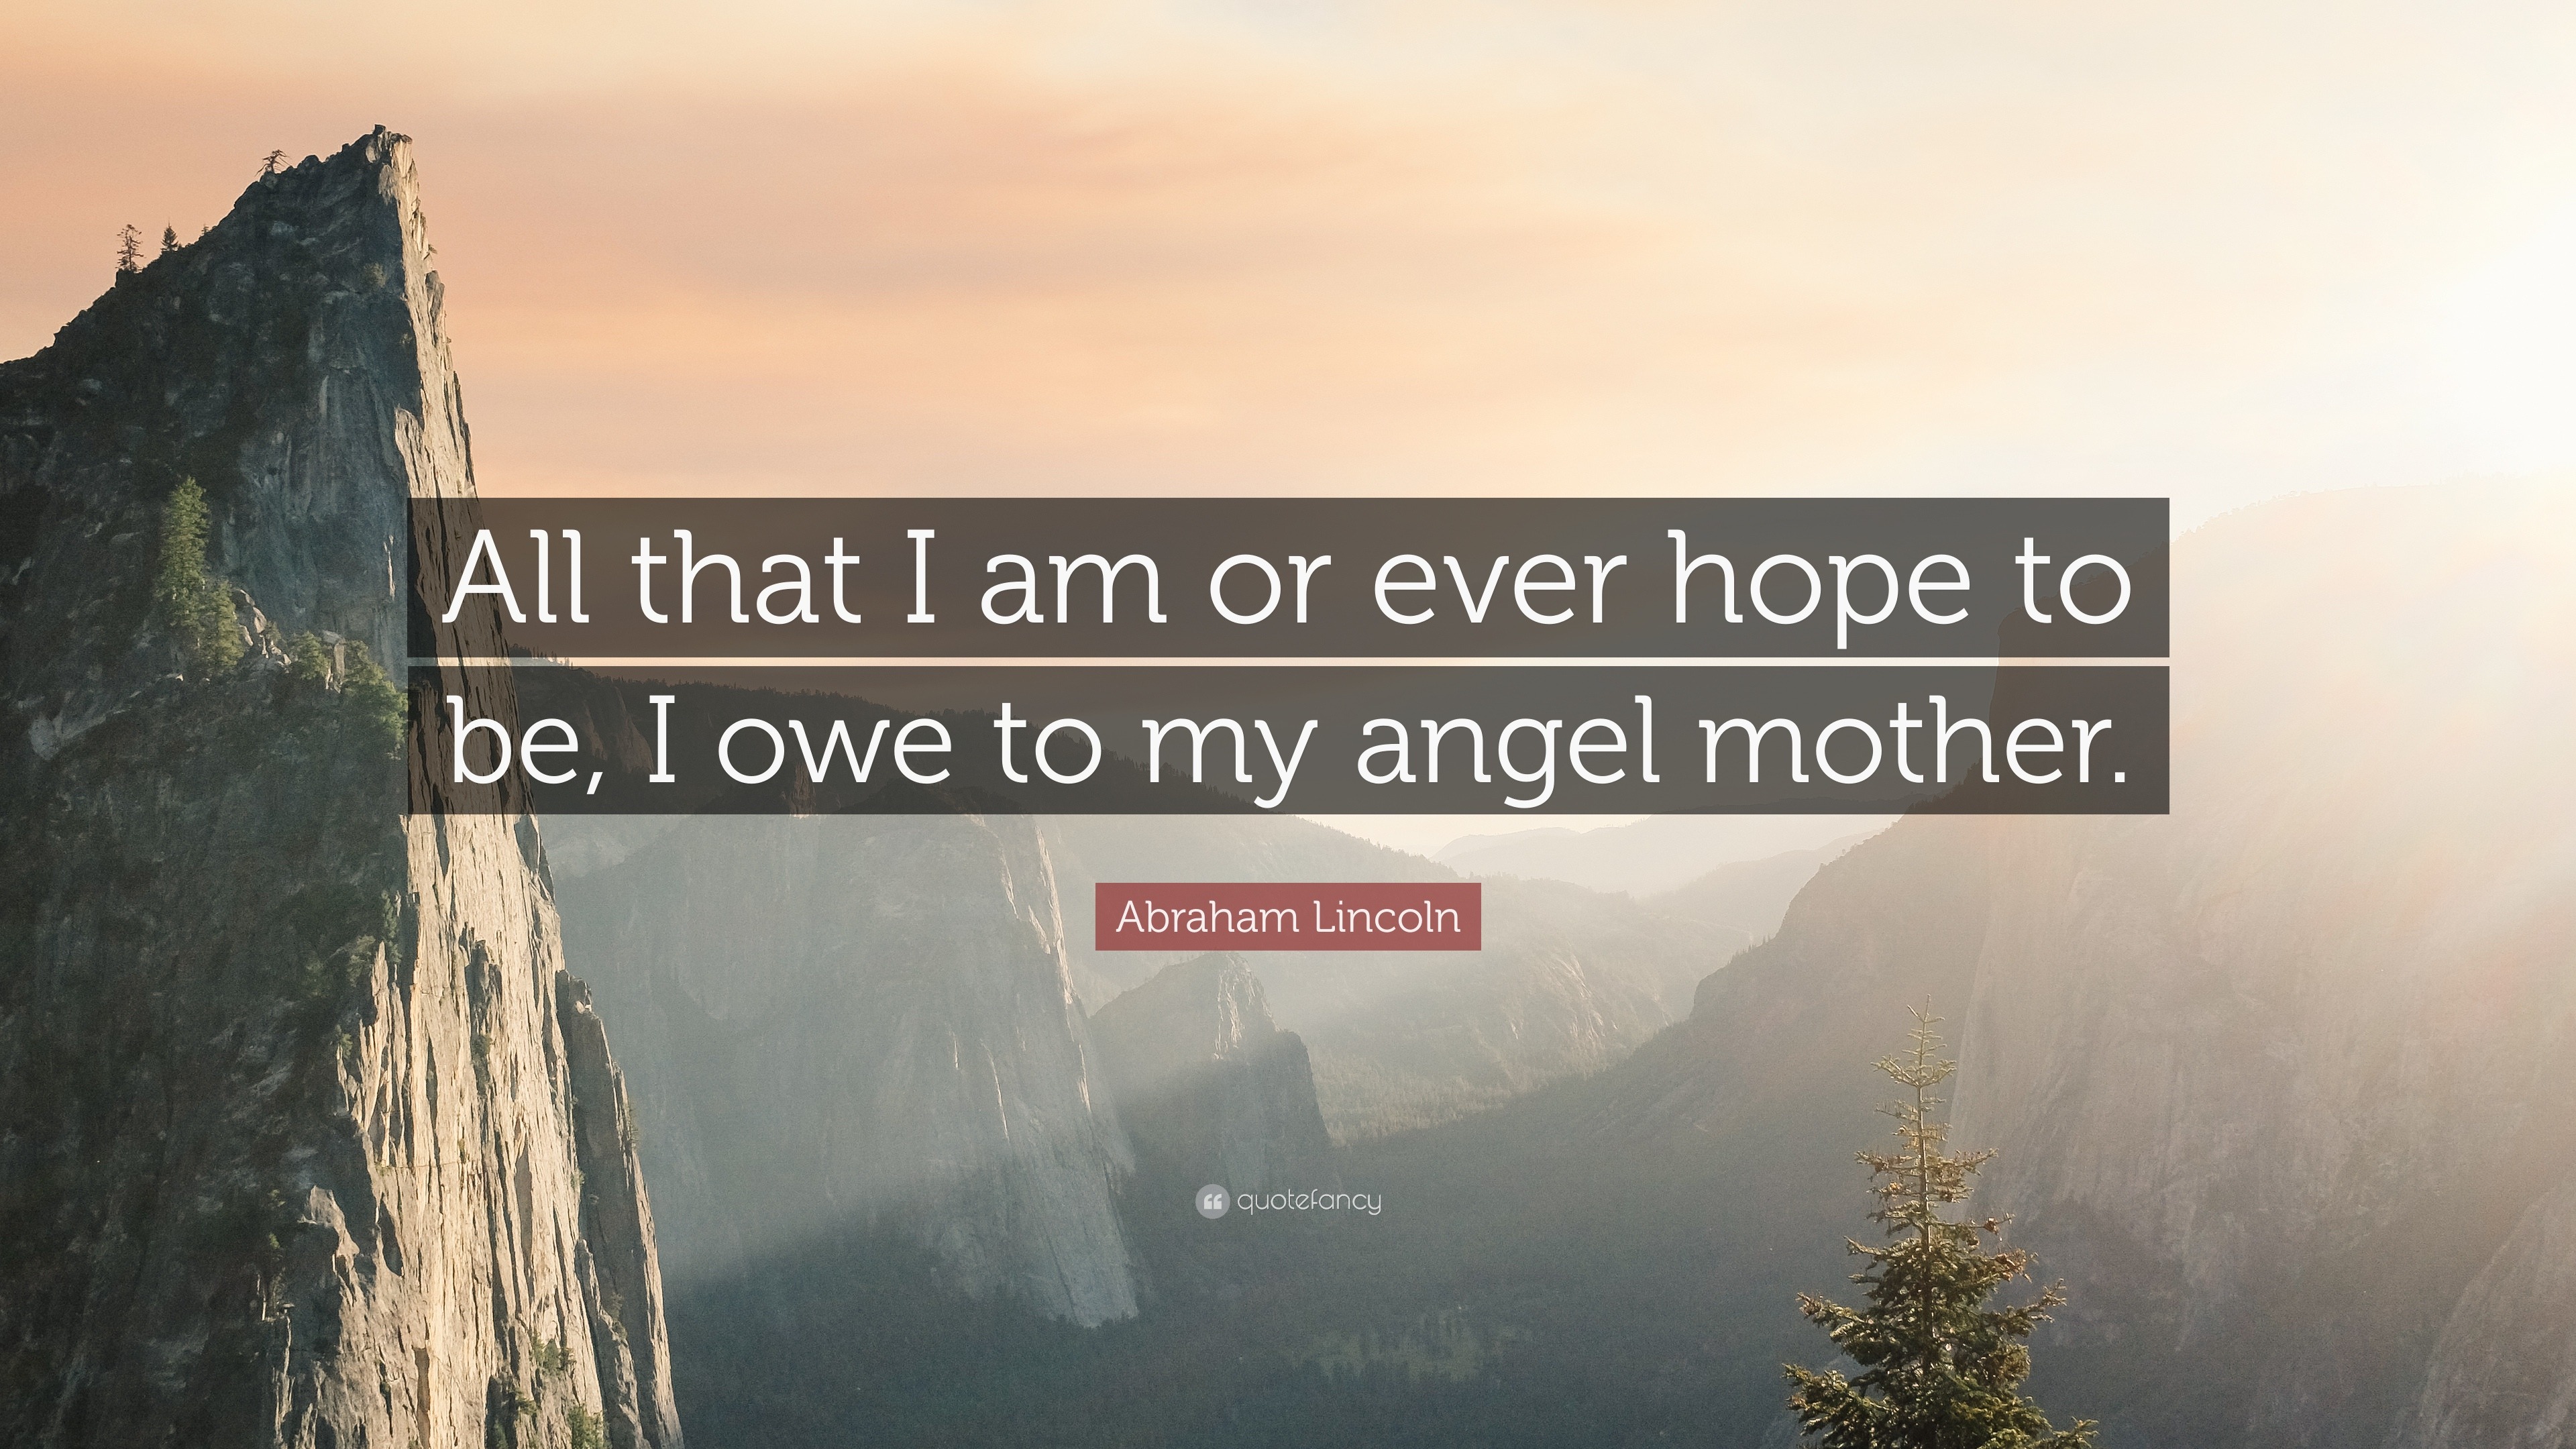 Abraham Lincoln Quote: “All that I am or ever hope to be, I owe to my